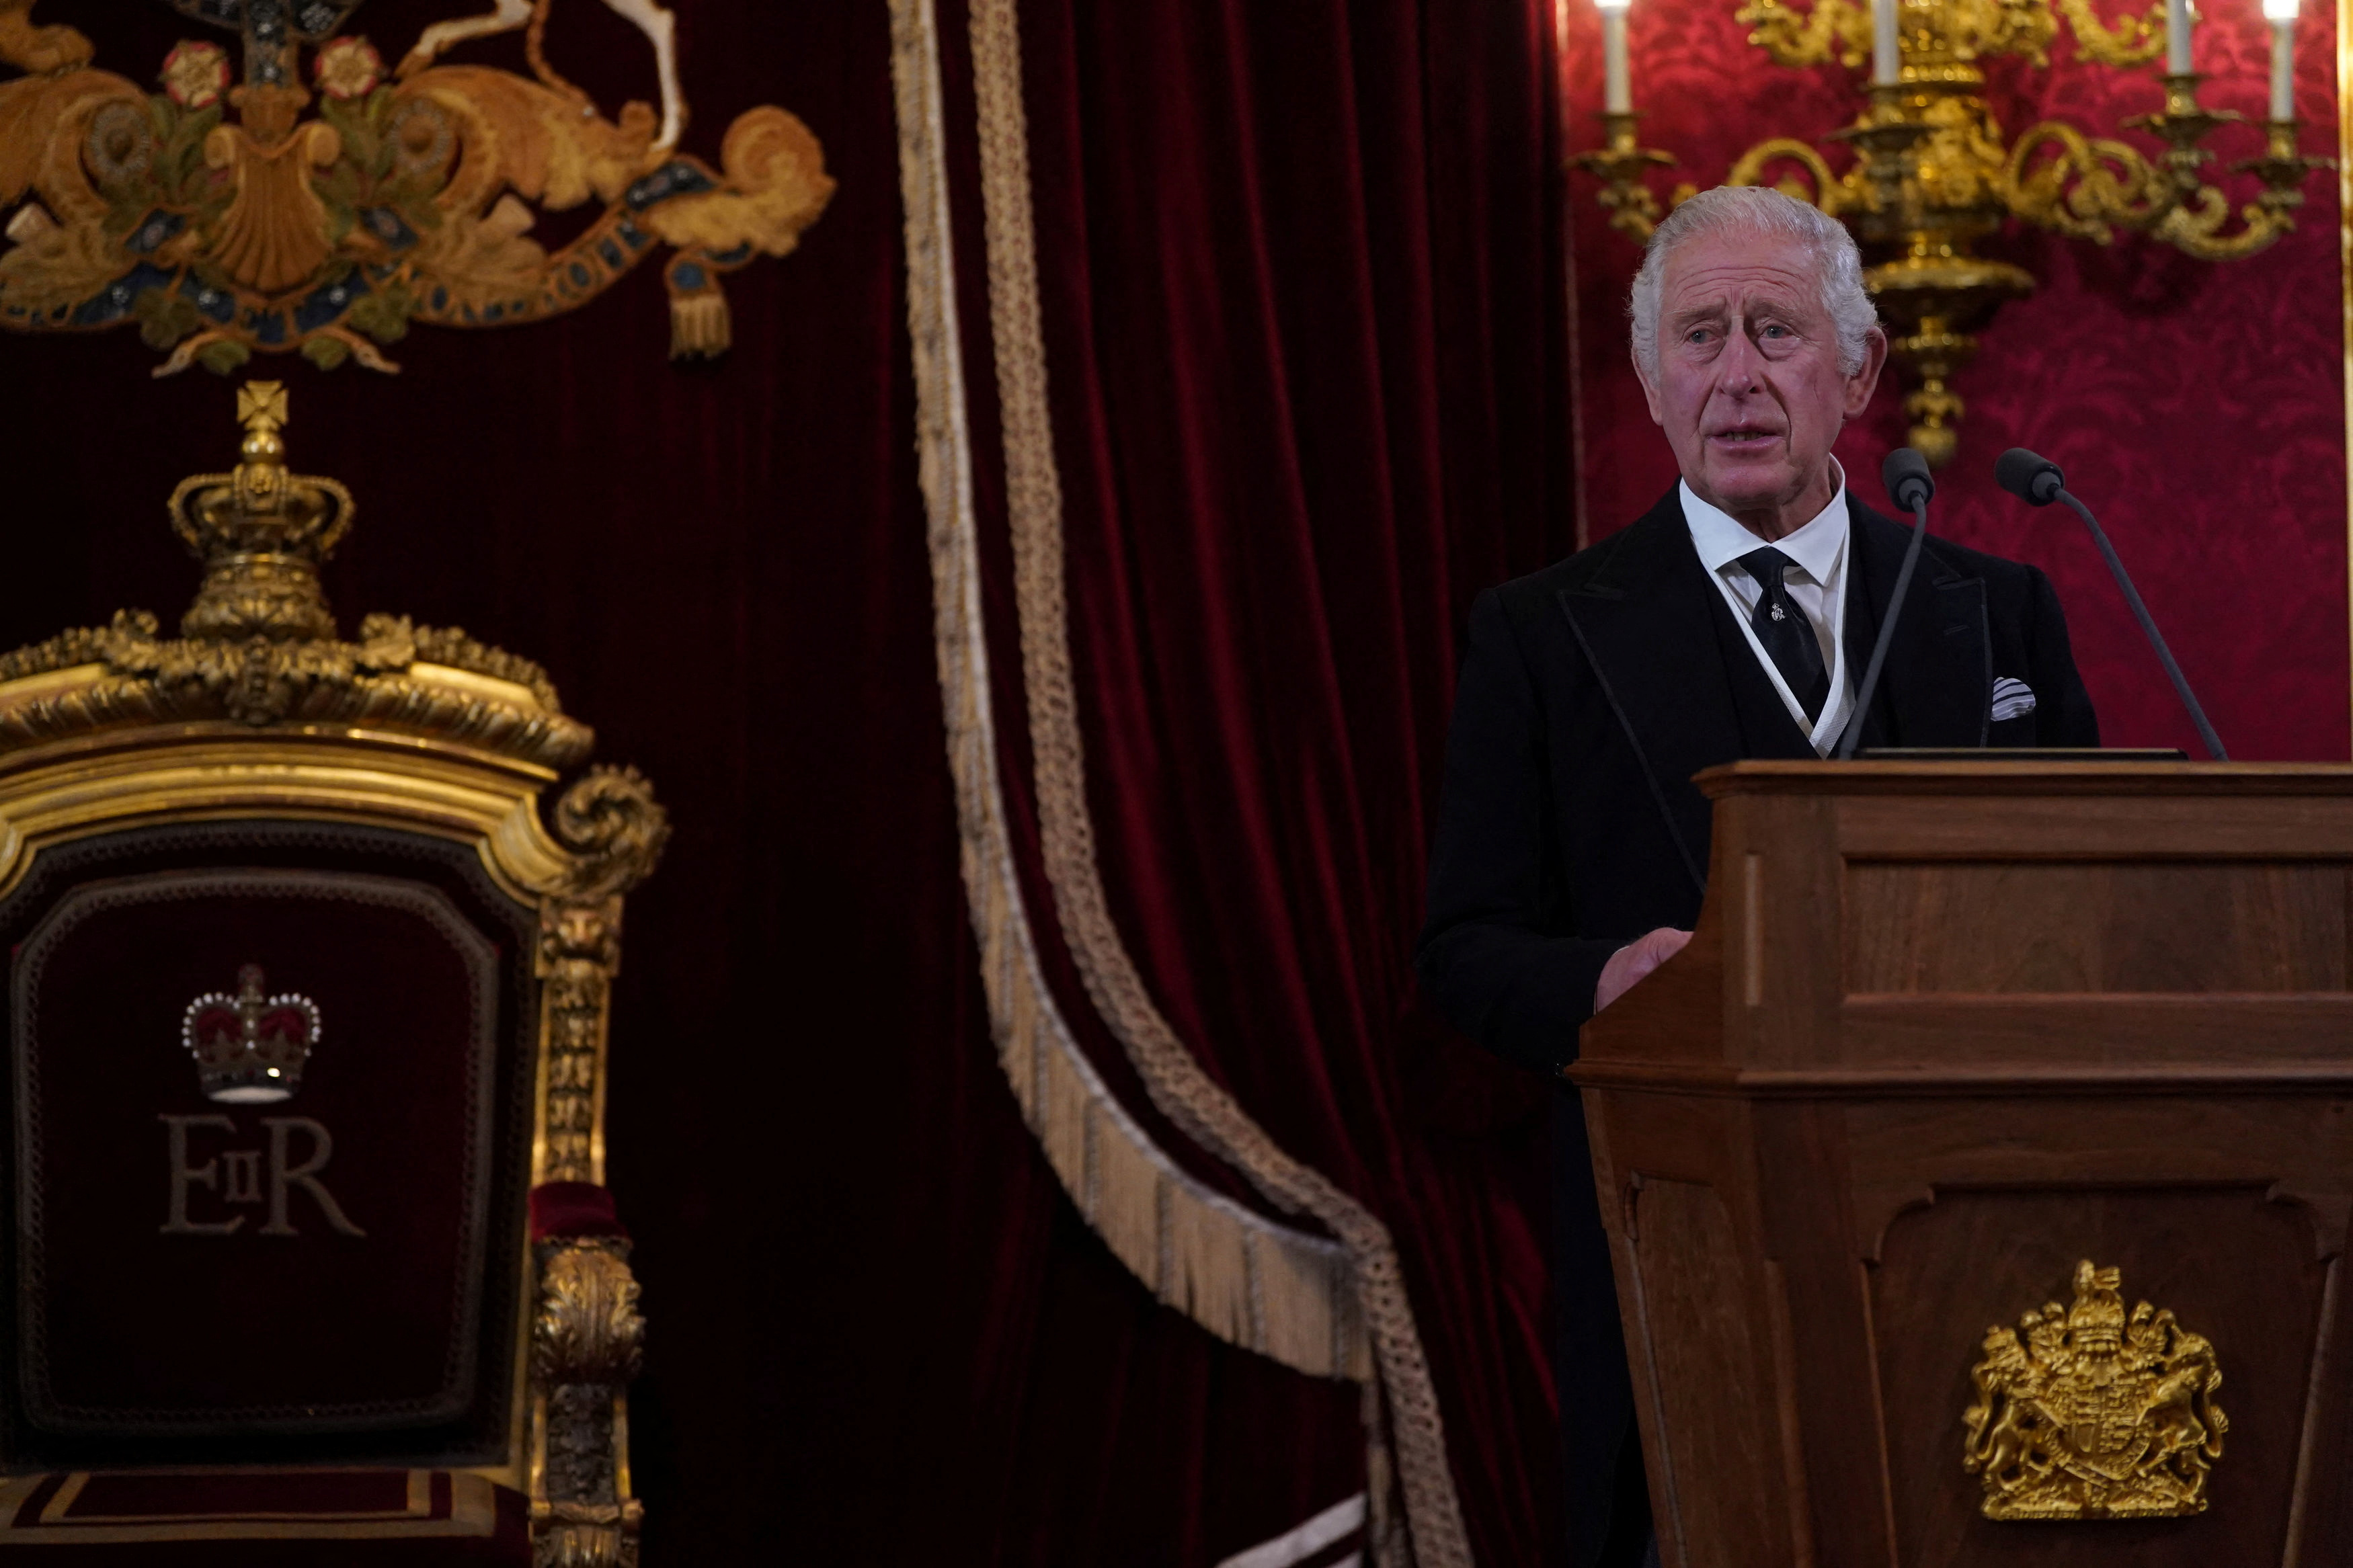 Britain's King Charles speaks during the Accession Council at St James's Palace, where he is formally proclaimed Britain's new monarch, following the death of Queen Elizabeth II, in London, Britain September 10, 2022.  Victoria Jones/Pool via REUTERS